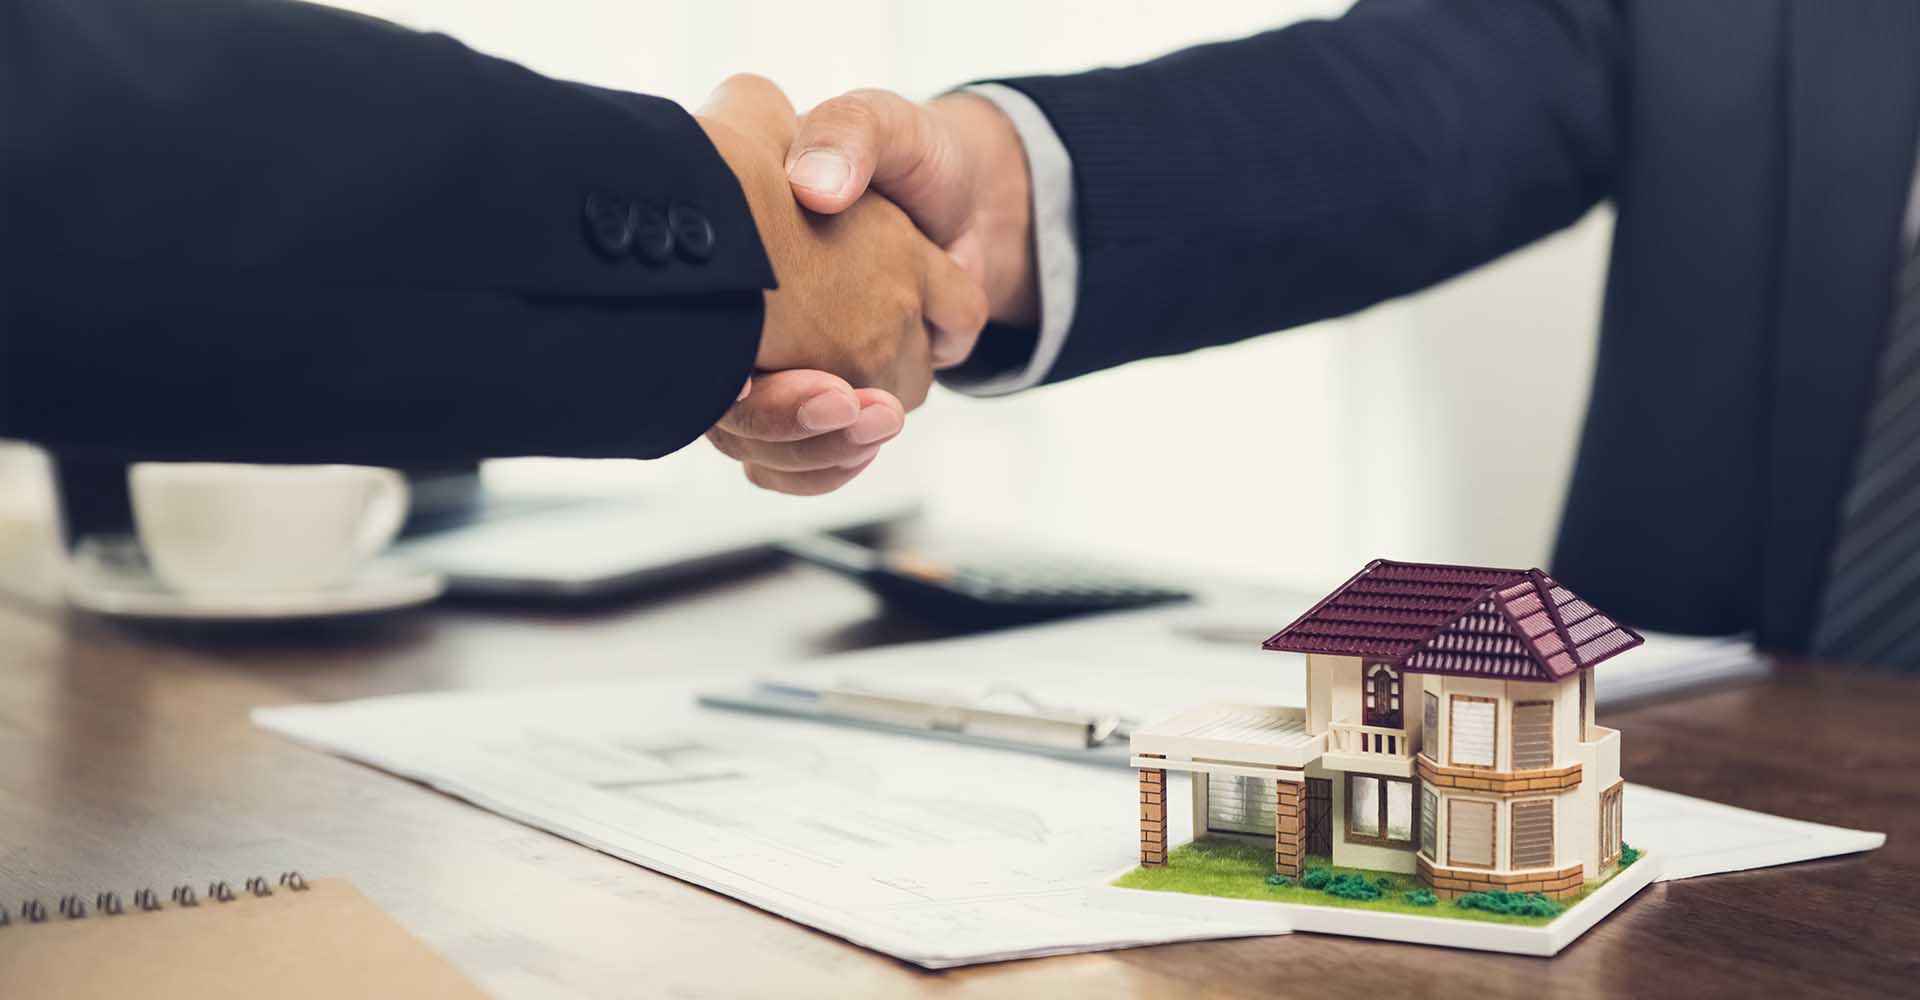 Real estate agent or architect making handshake with client after signing agreement in the meeting